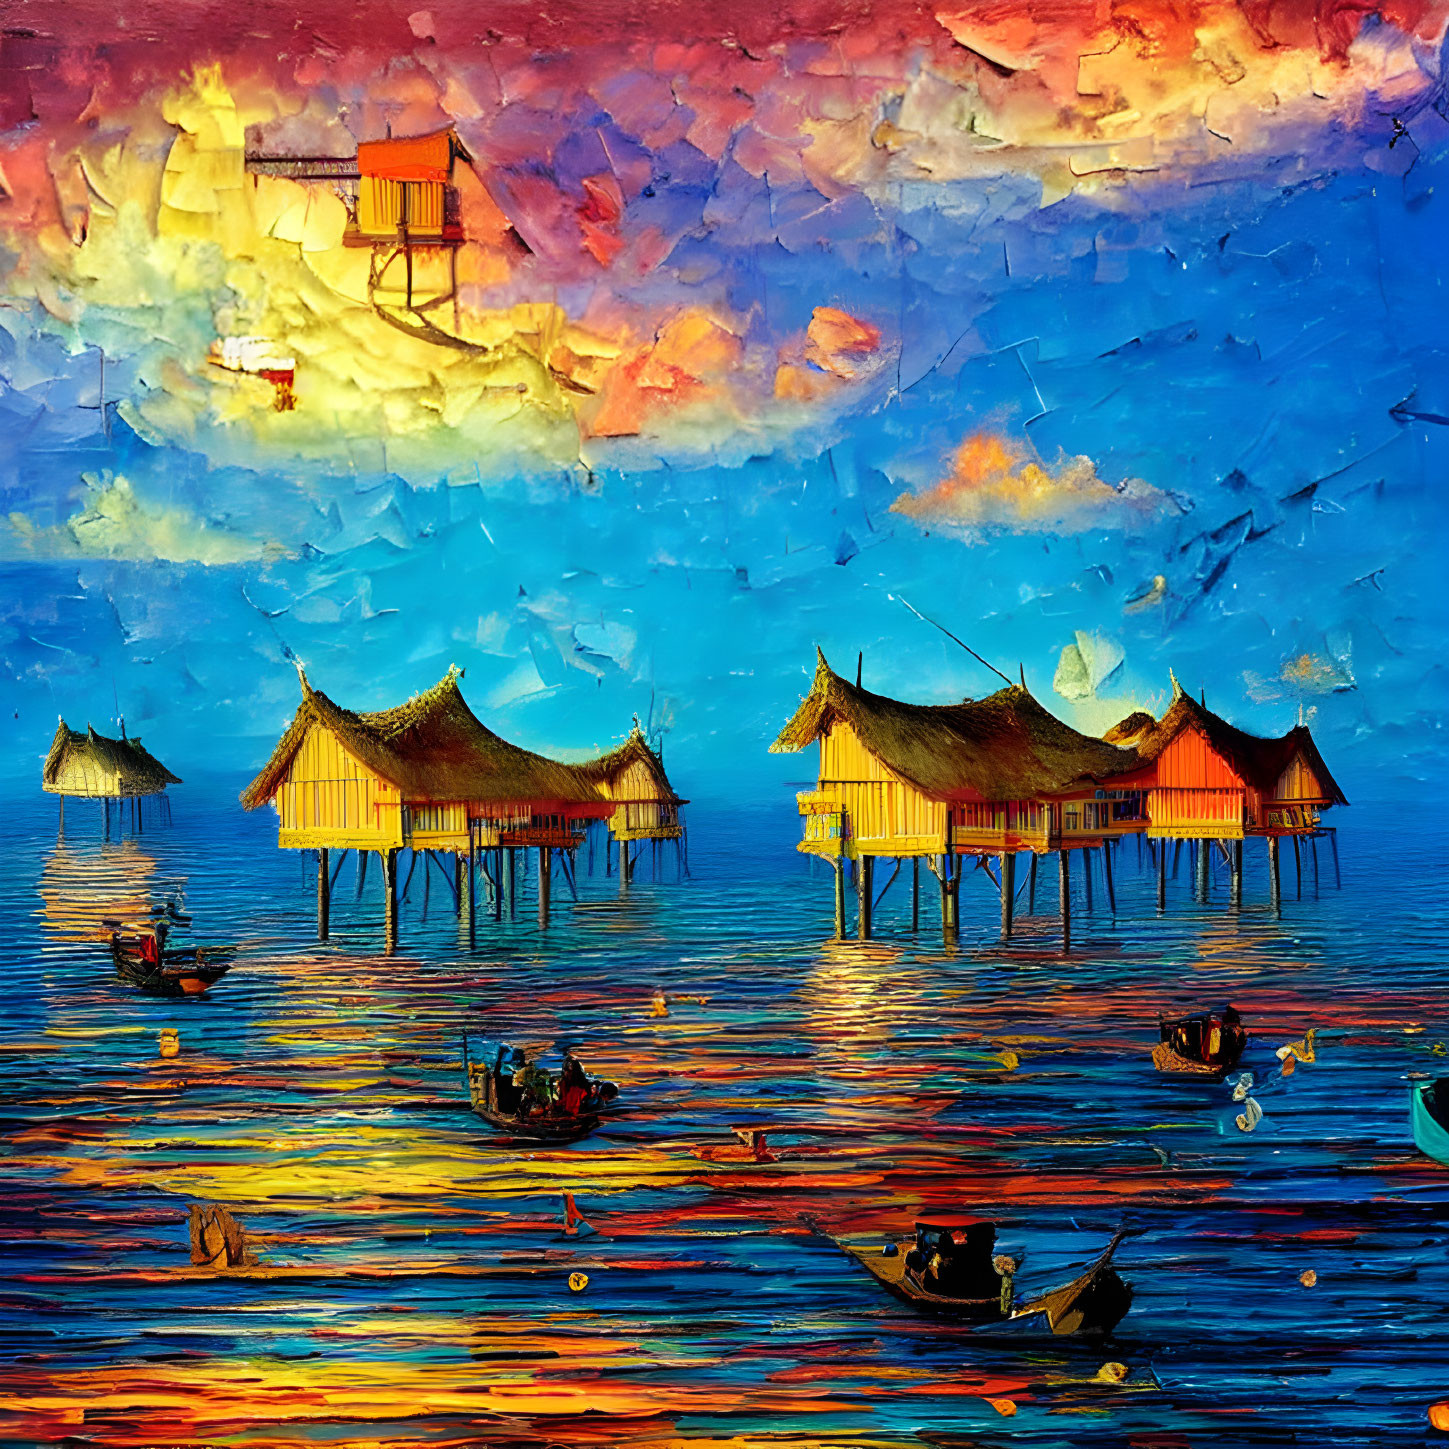 Vibrant sunset painting of stilt houses over water with boats and reflection